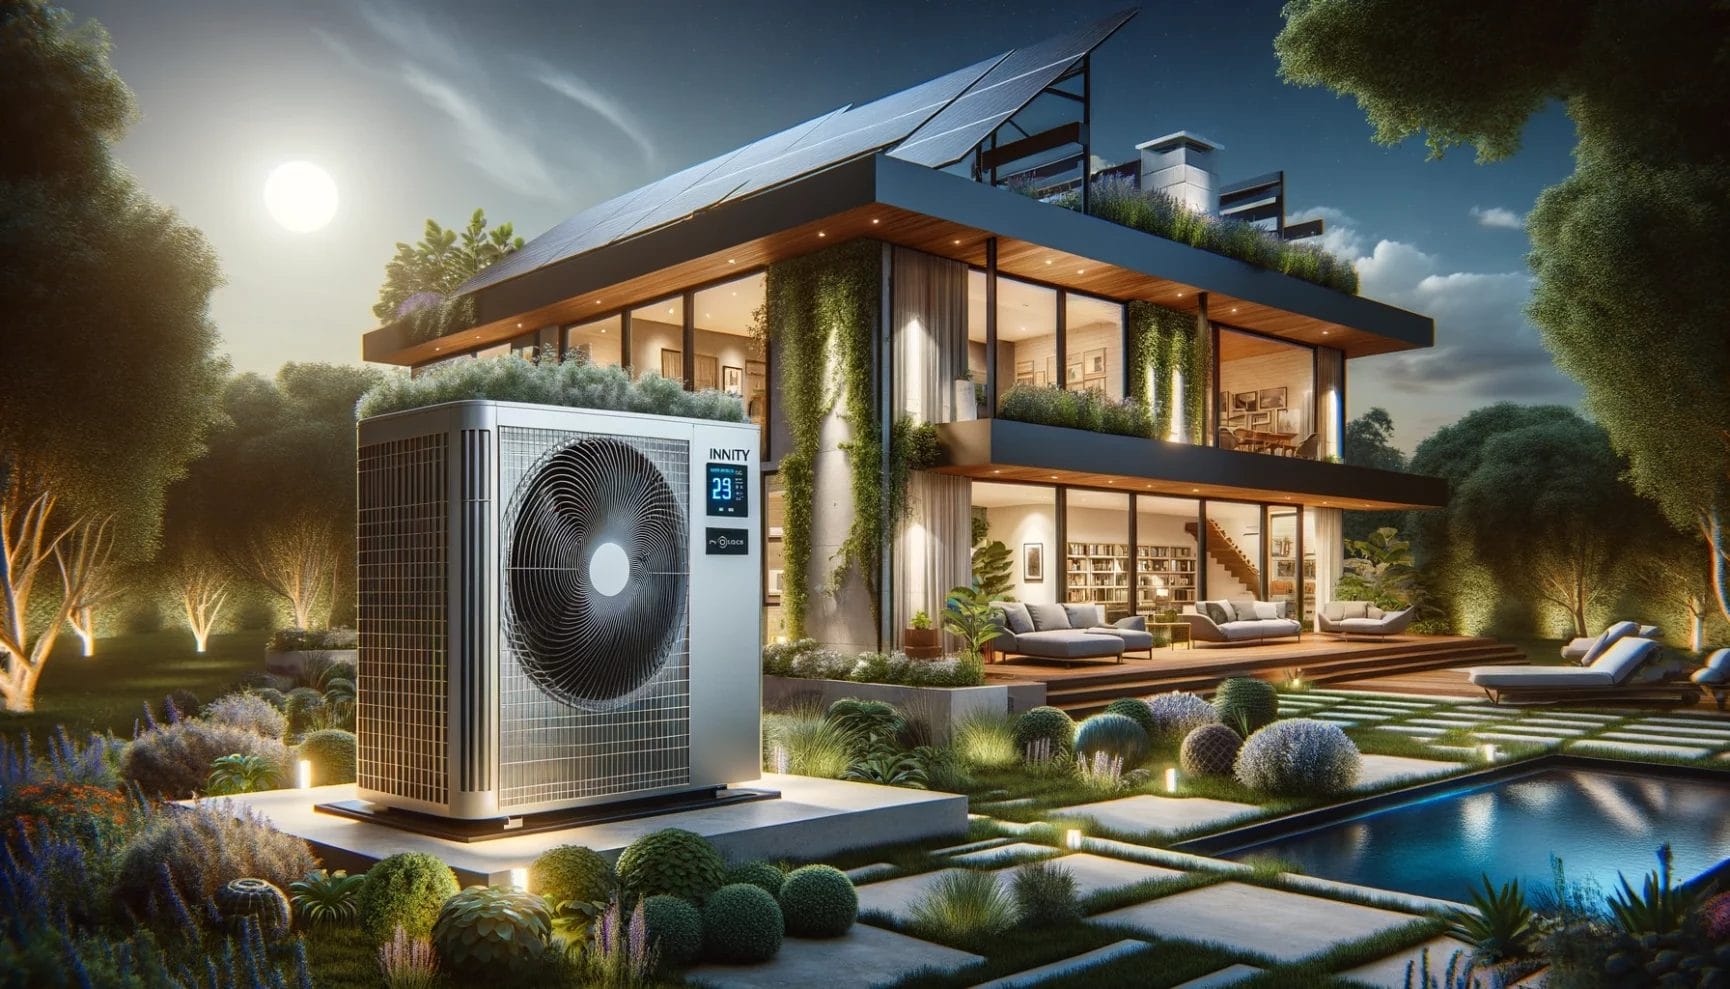 Modern sustainable home equipped with an energy-efficient air conditioning unit at dusk.